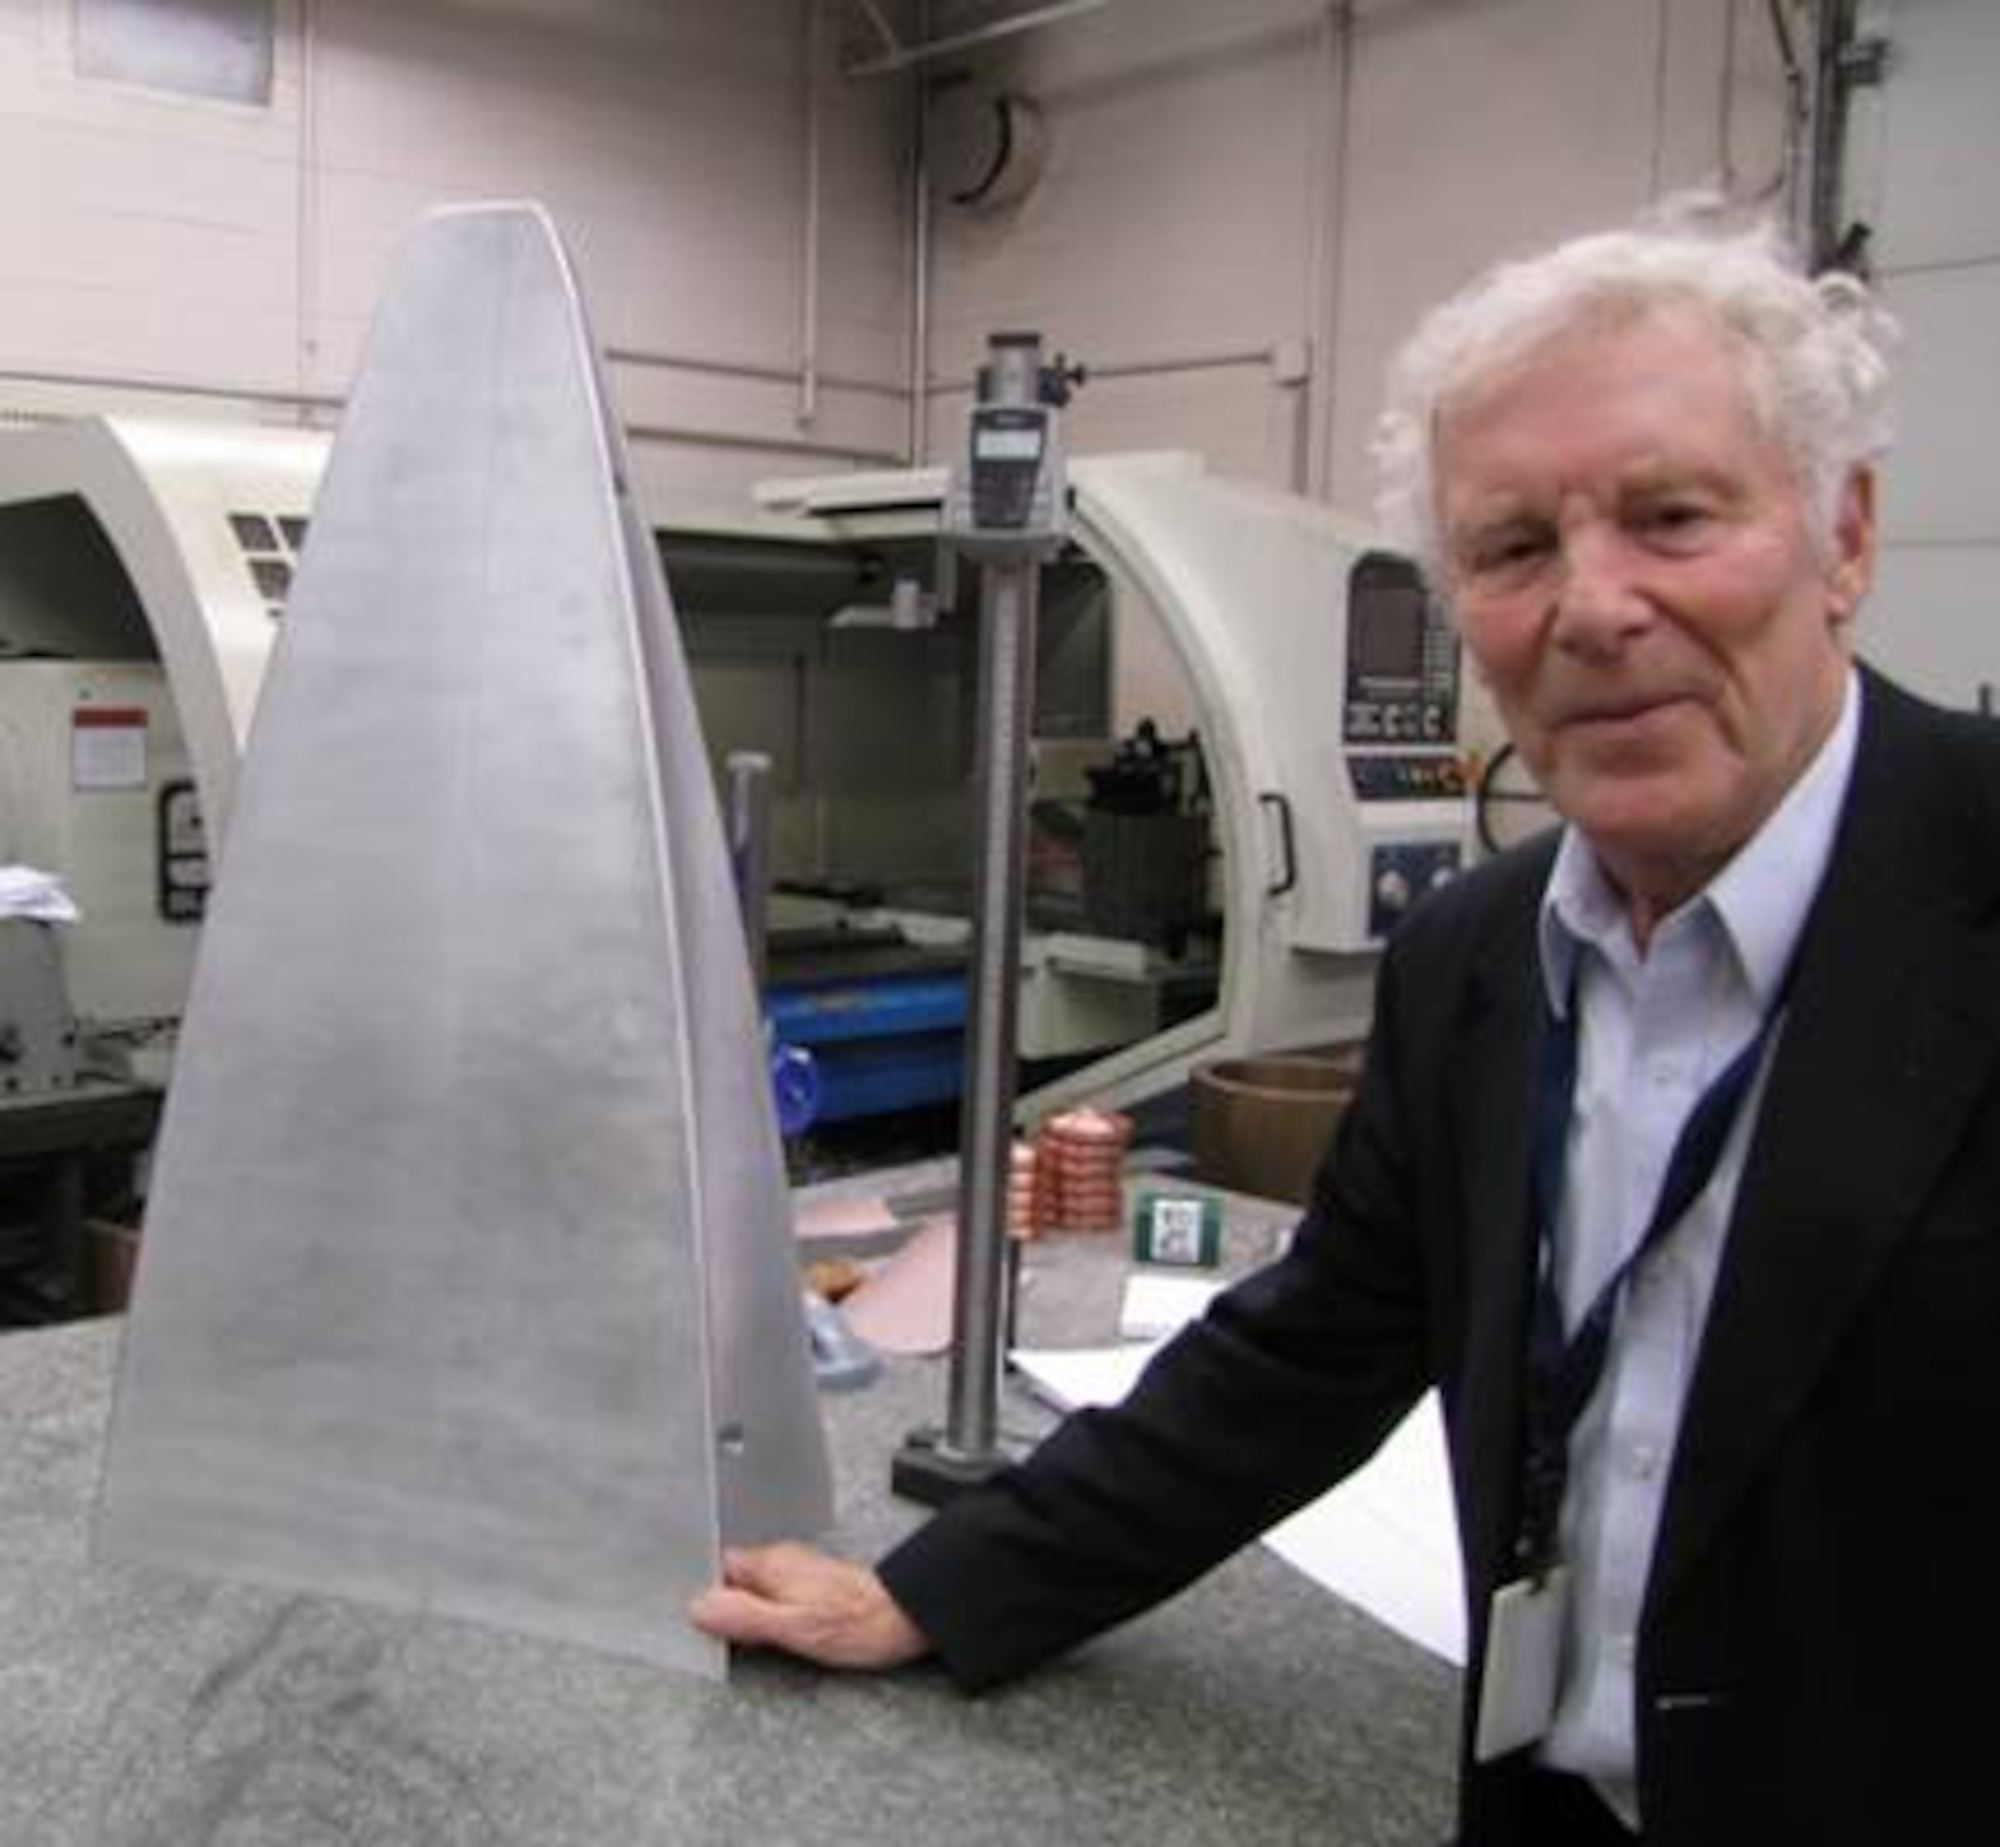 Mike Holden with BOLT. With more than 60 years in the hypersonics field of study, Mike Holden brought major contributions to understanding to the BOLT experimentation program. (Courtesy Photo)